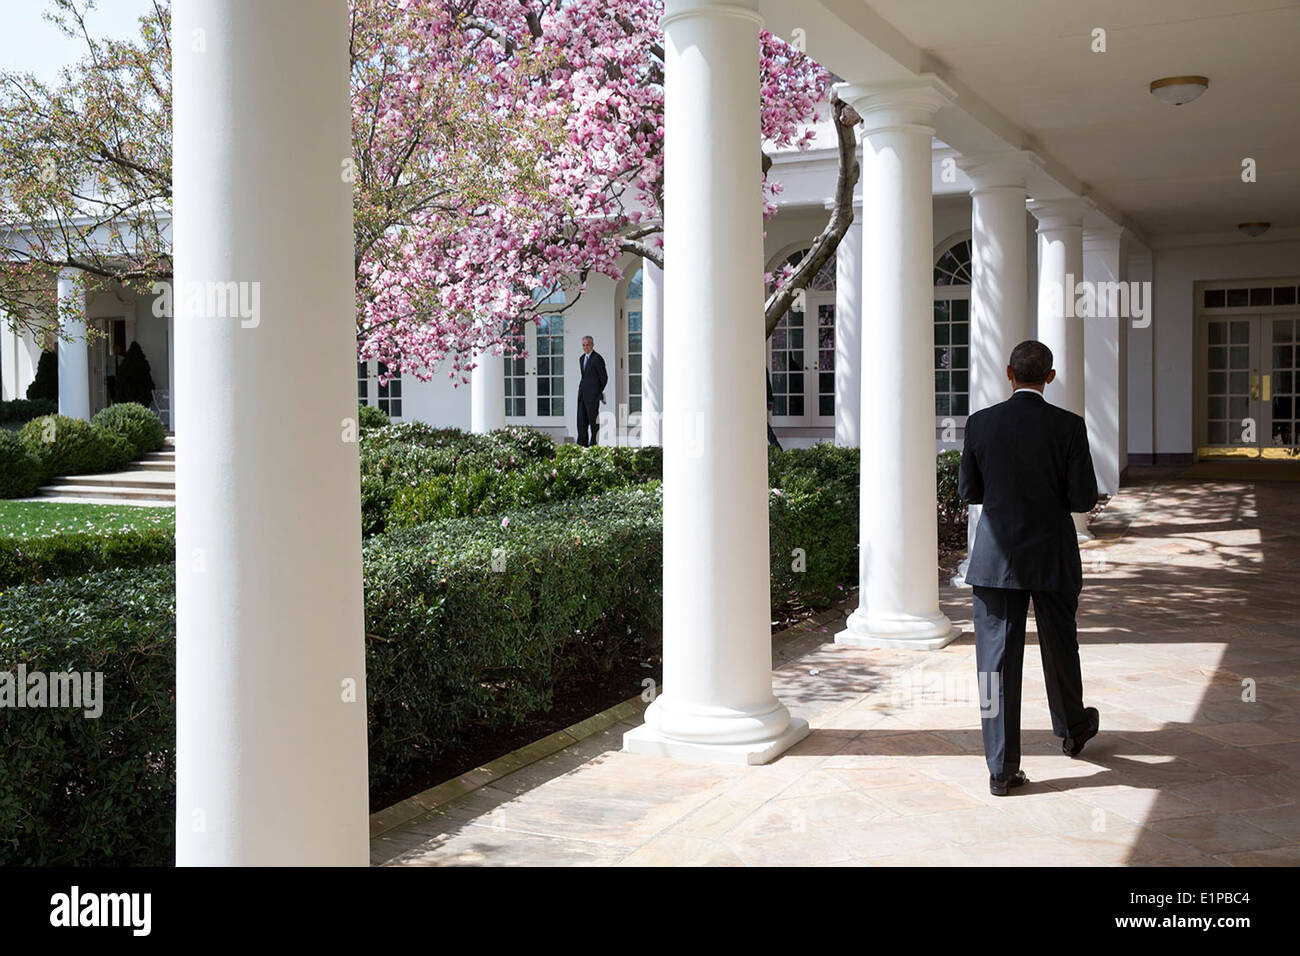 US President Barack Obama walks along the Colonnade of the White House past flowering trees as Chief of Staff Denis McDonough waits for him April 8, 2014 in Washington, DC. Stock Photo